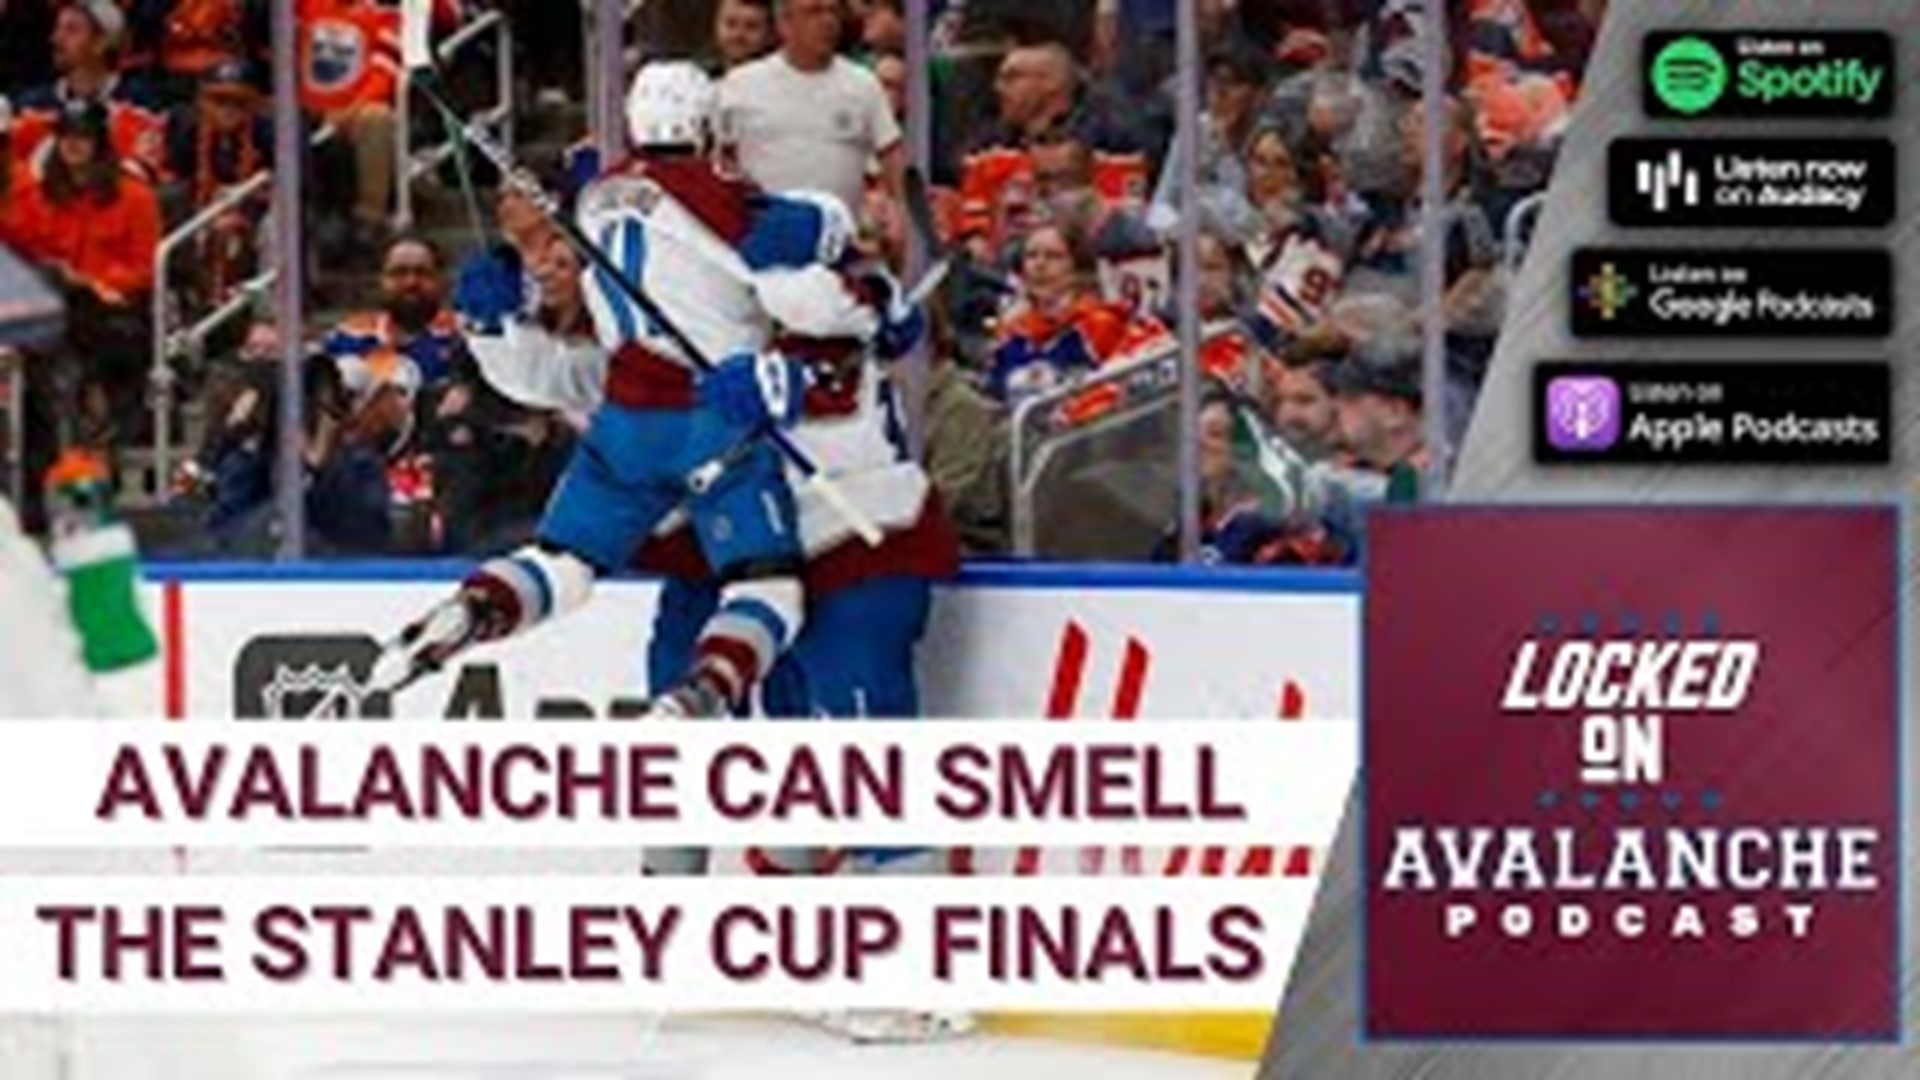 Now, with one more win the Colorado Avalanche will punch their ticket to the Stanley Cup Finals. All is good in Avs land right now. But the job is not done.